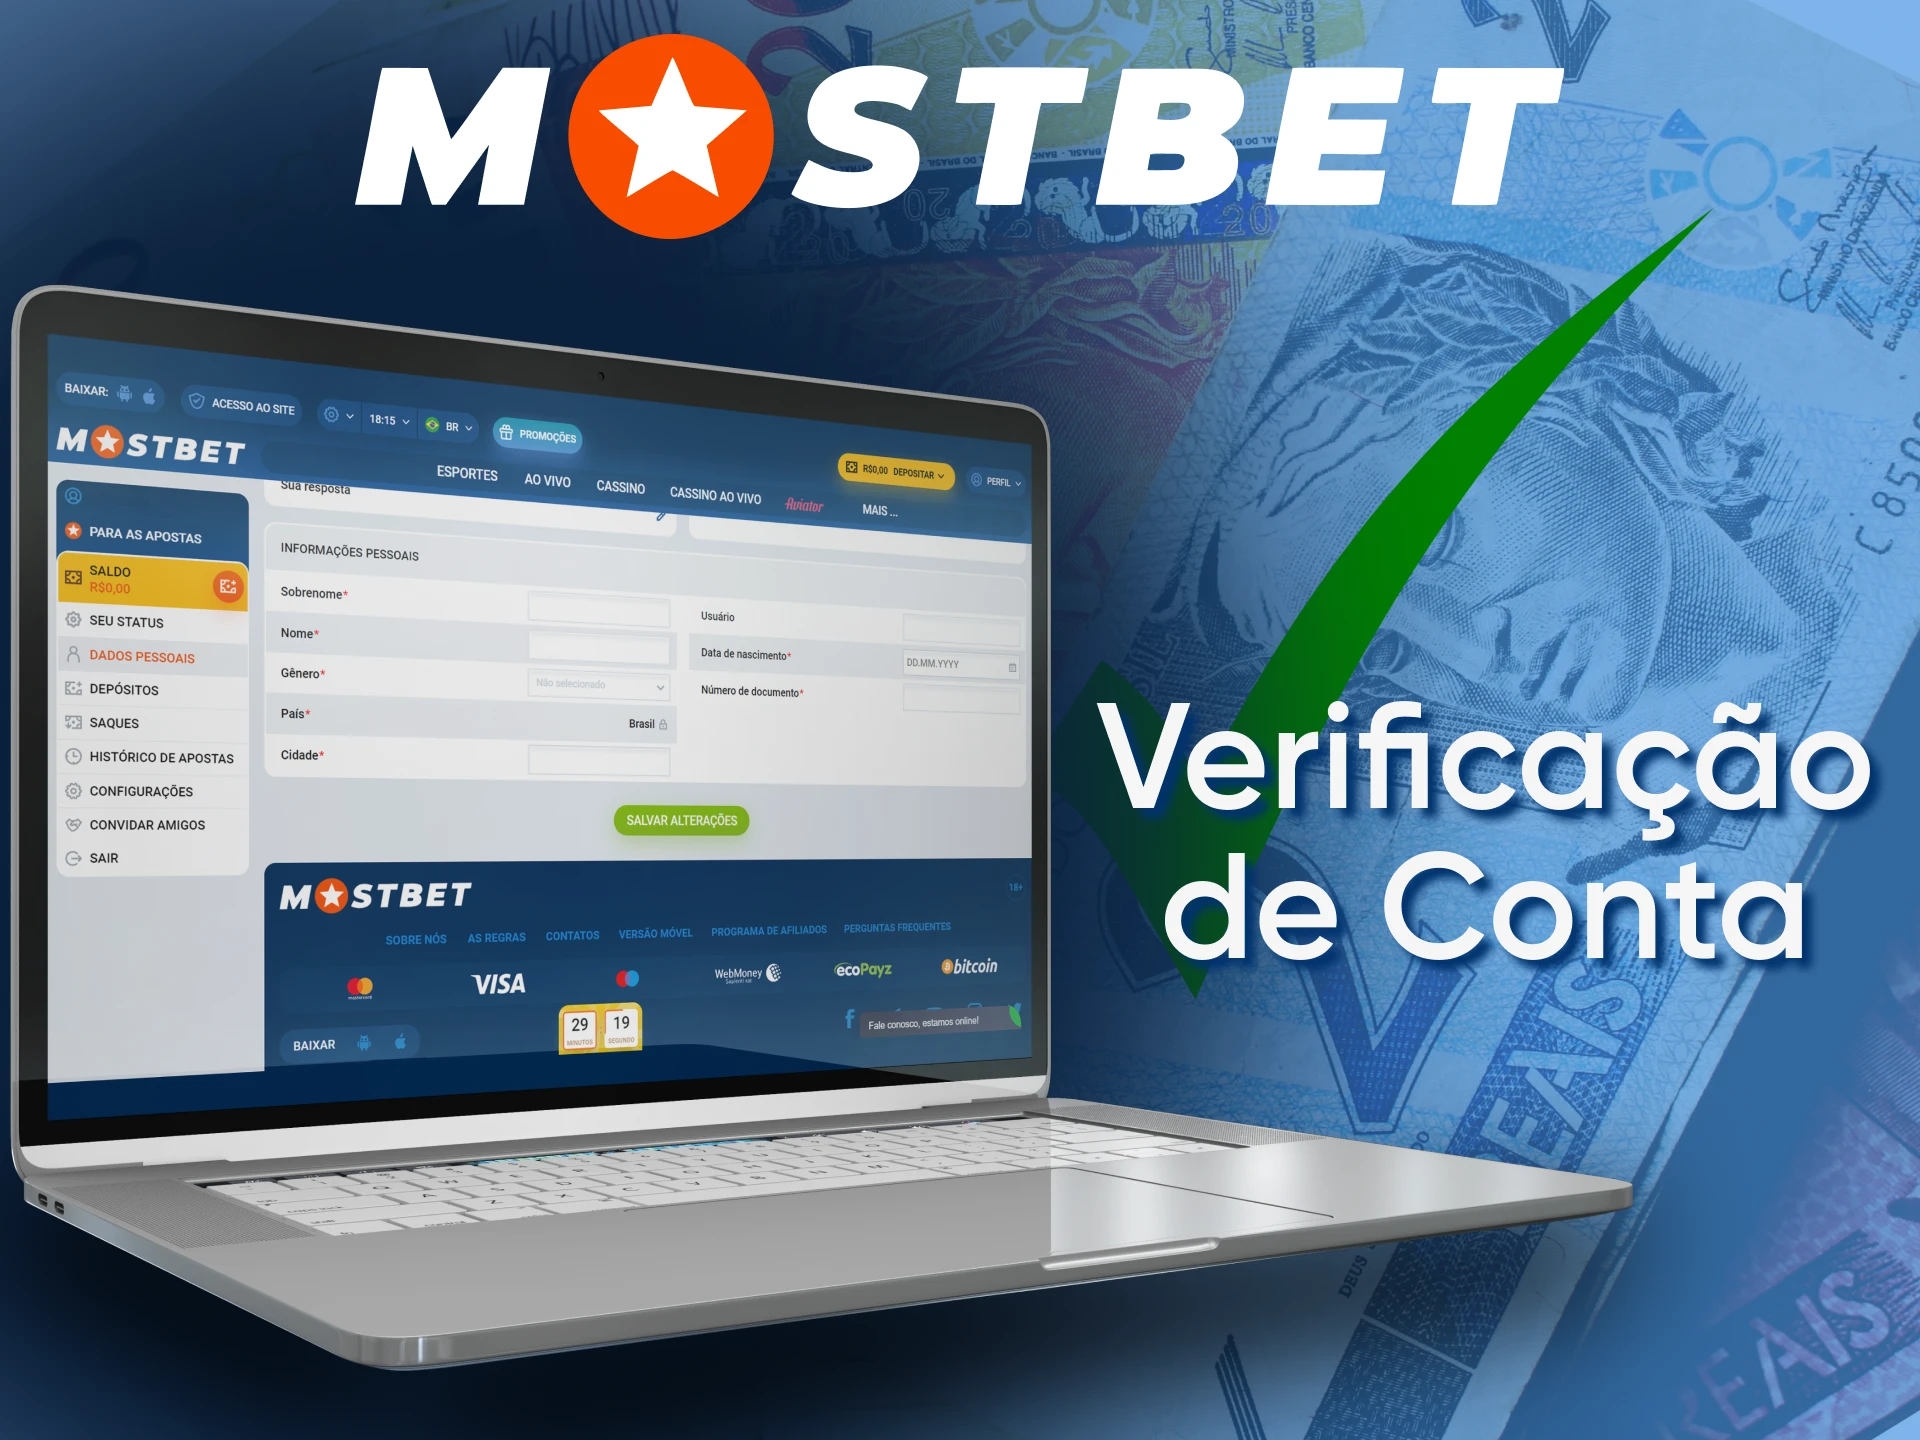 To withdraw money from Mostbet, you need to go through the verification procedure.